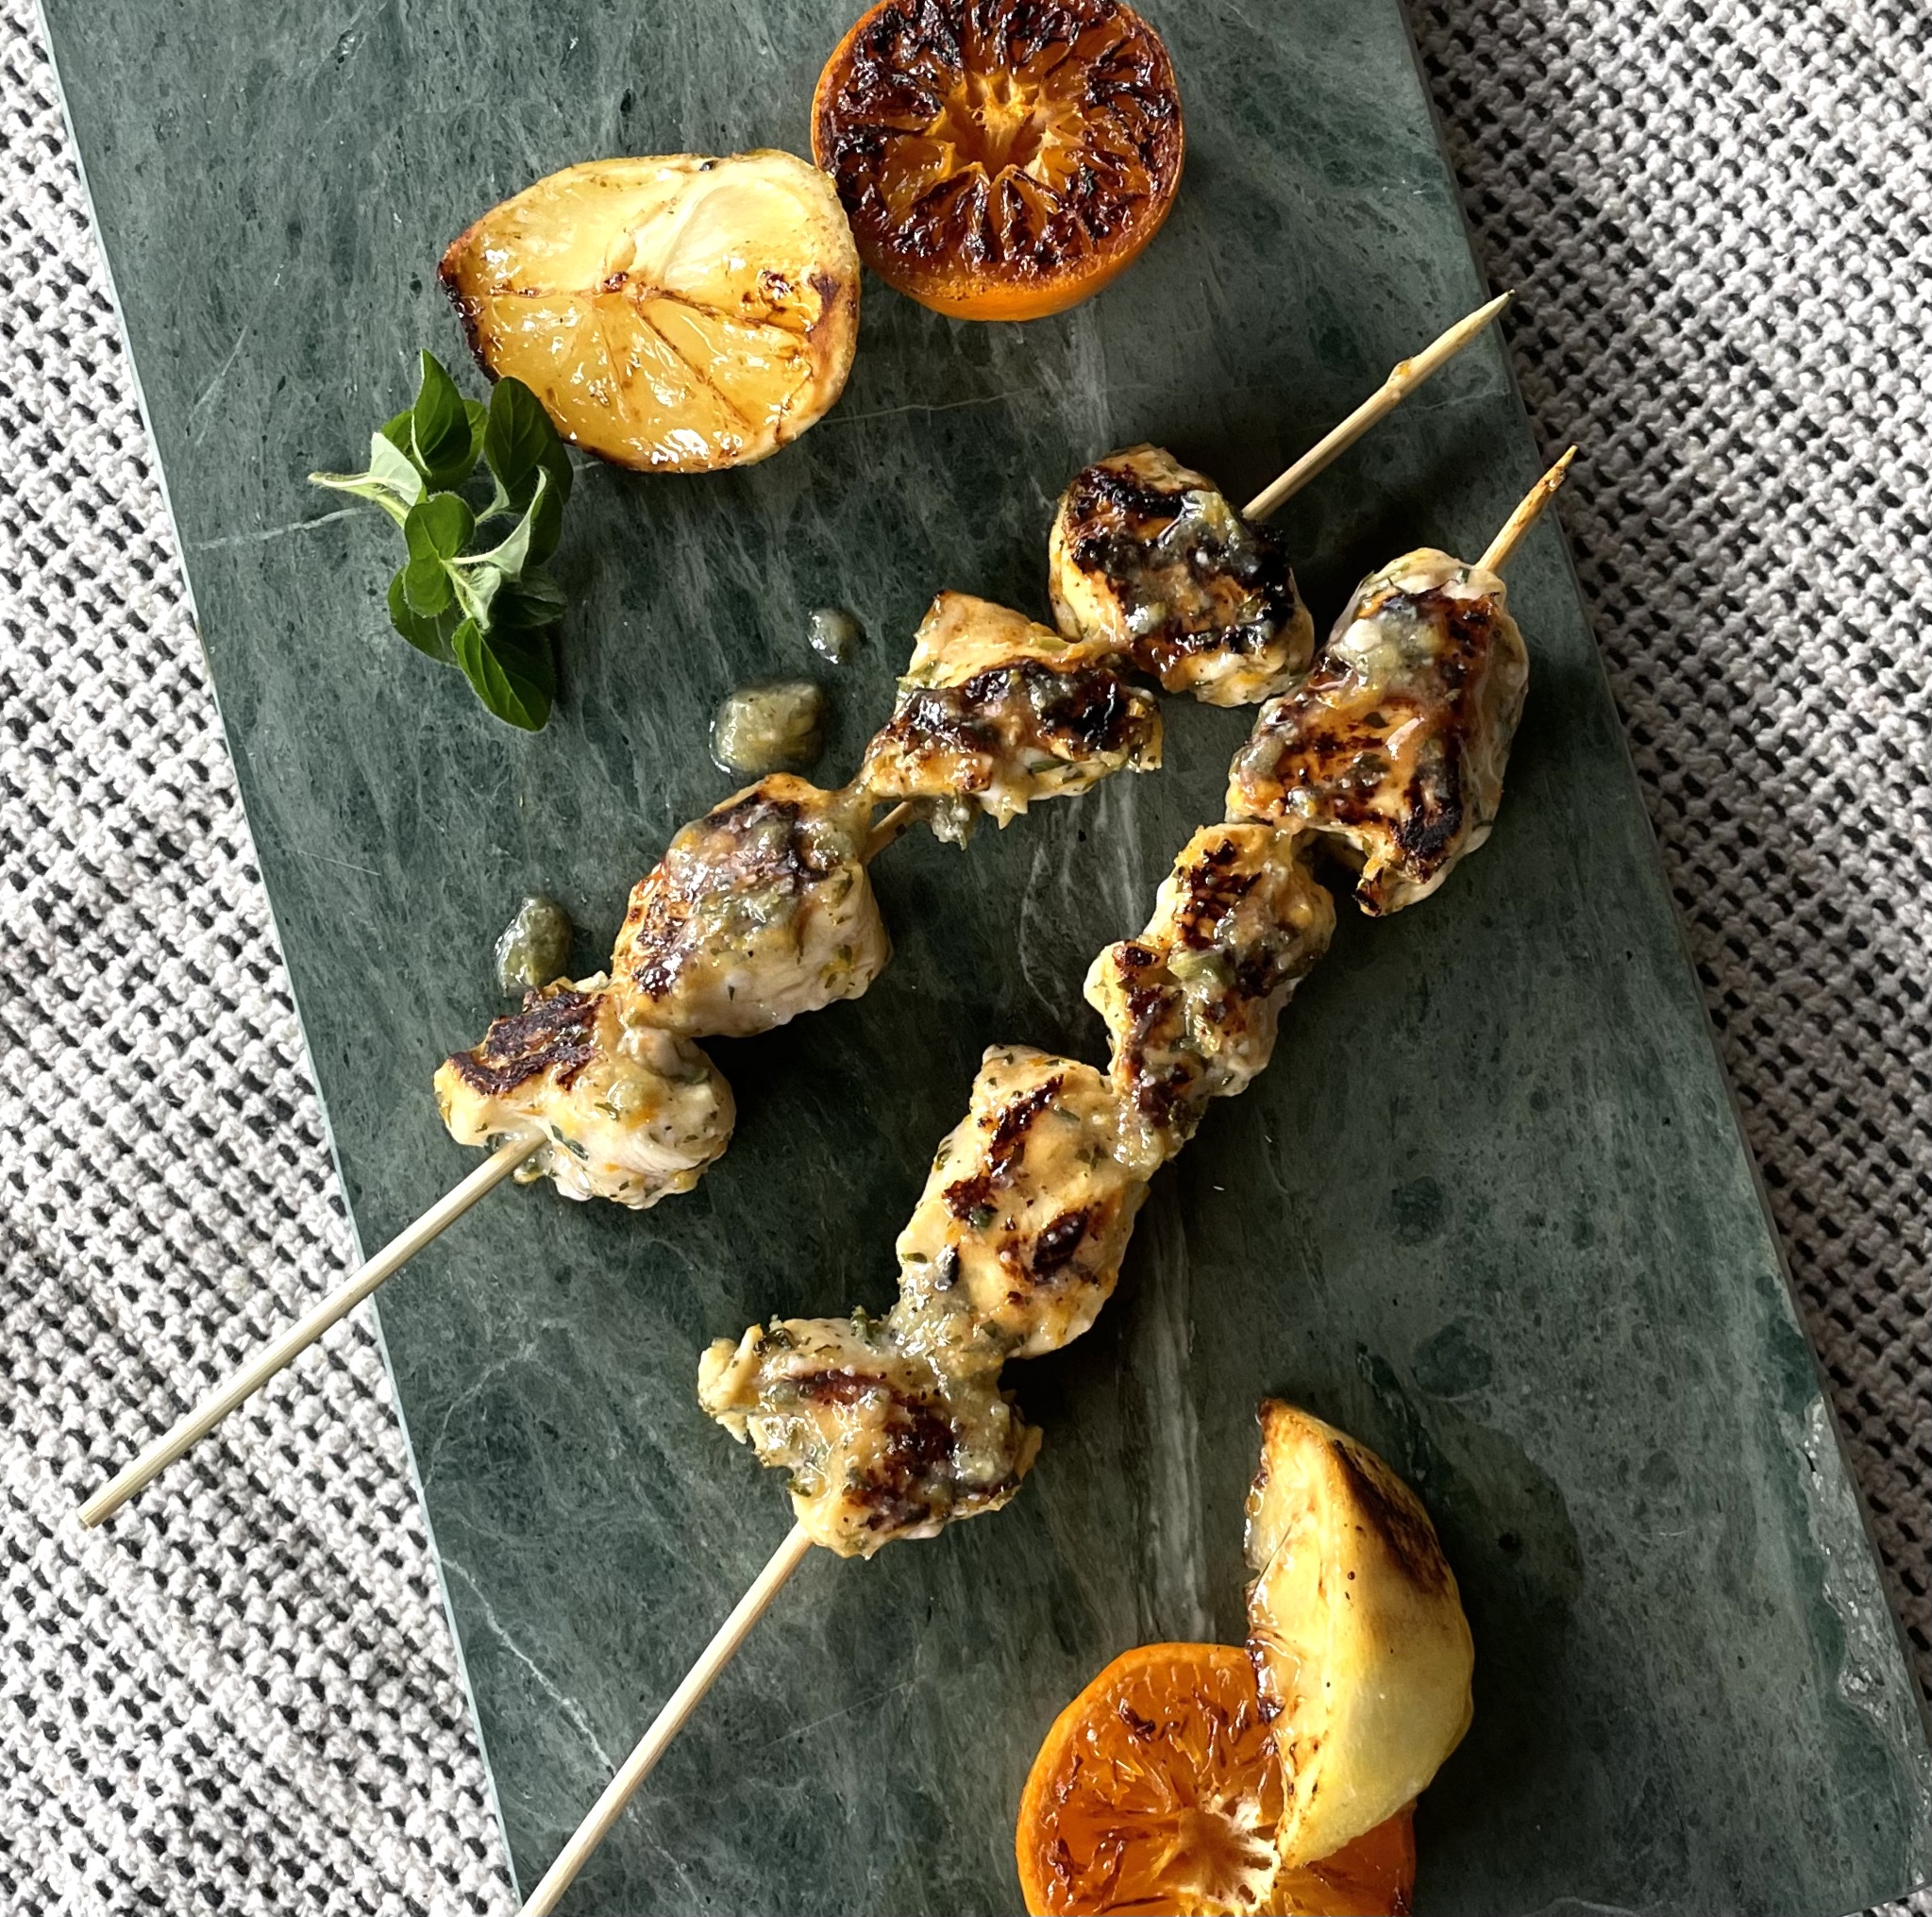 Locally Seasoned Chicken Skewers with Grilled Citrus